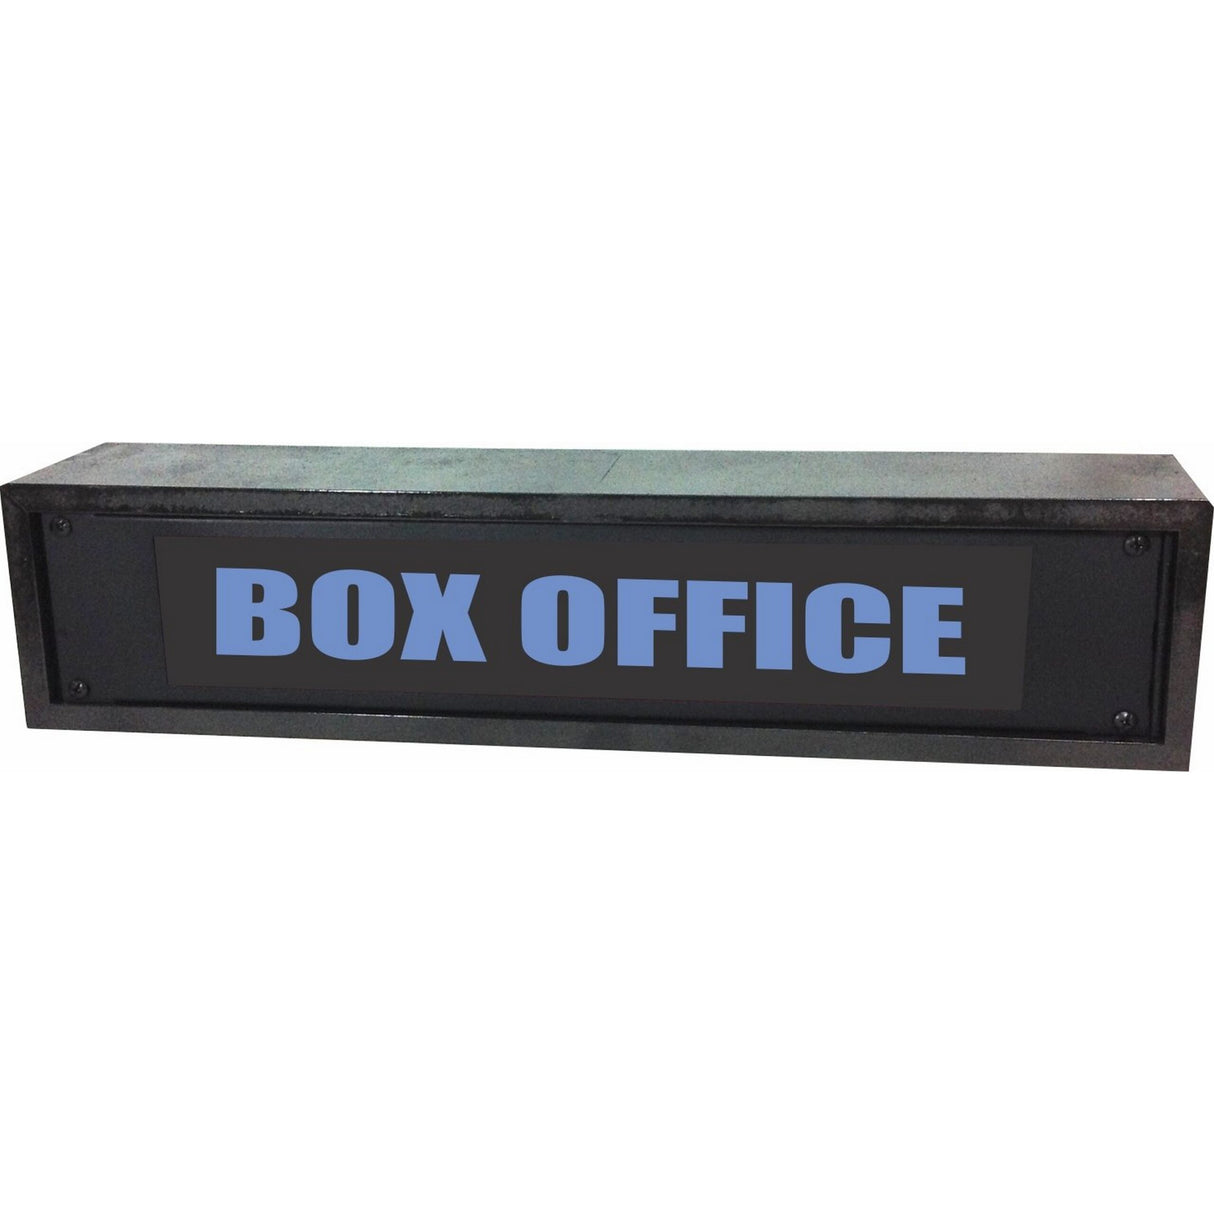 American Recorder OAS-4054BL "BOX OFFICE" 2U Rackmount LED Lighted Sign with Enclosure, Blue